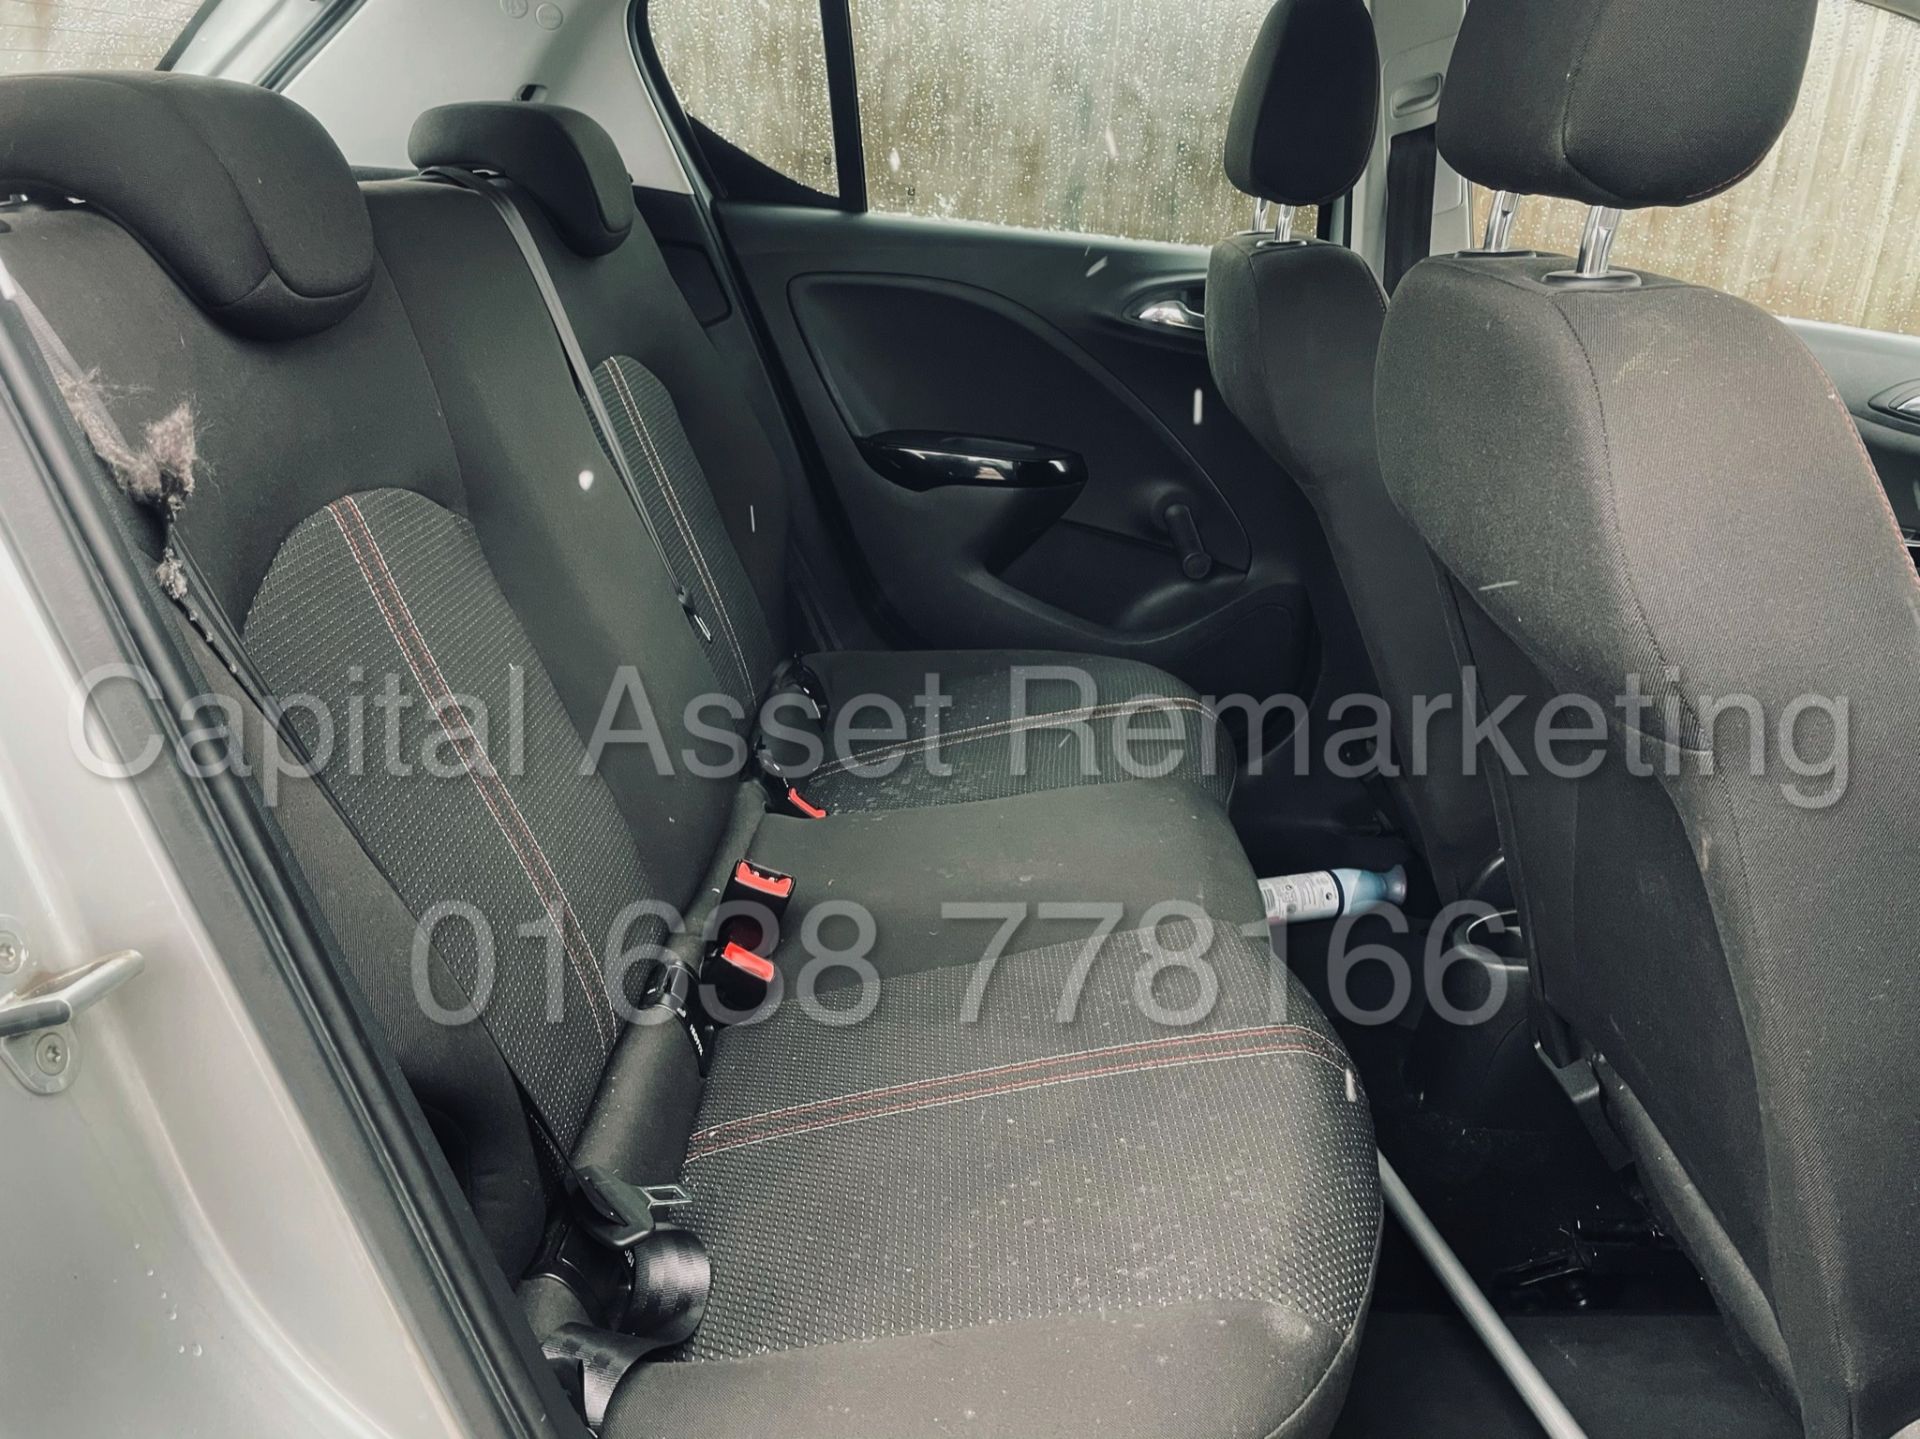 ON SALE VAUXHALL CORSA *LIMITED EDITION* 5 DOOR (2017 MODEL) '1.4 PETROL - ECOFLEX' *AIR CON* - Image 27 of 44